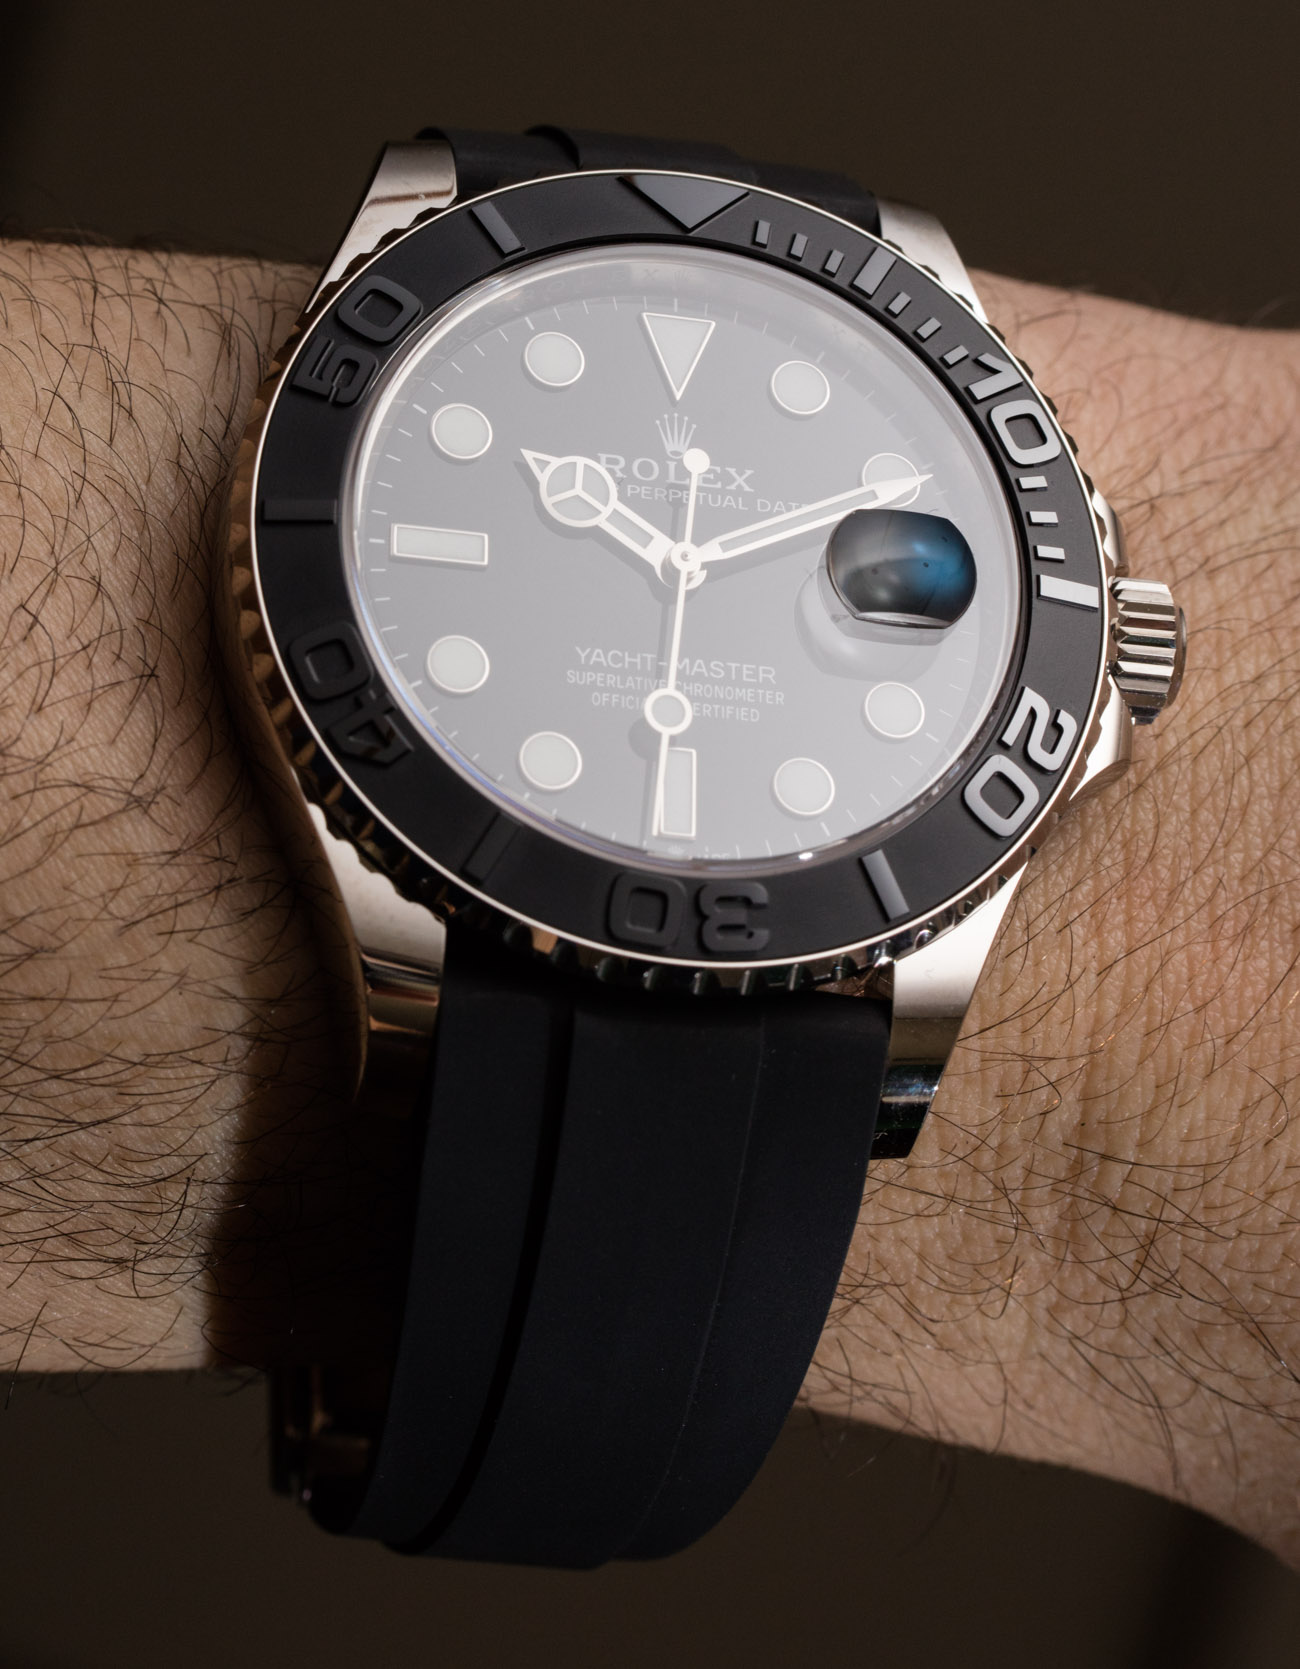 Insider: Rolex Yacht-Master 42 White Gold ref. 226659. Very Nice but  Something is Missing. — WATCH COLLECTING LIFESTYLE